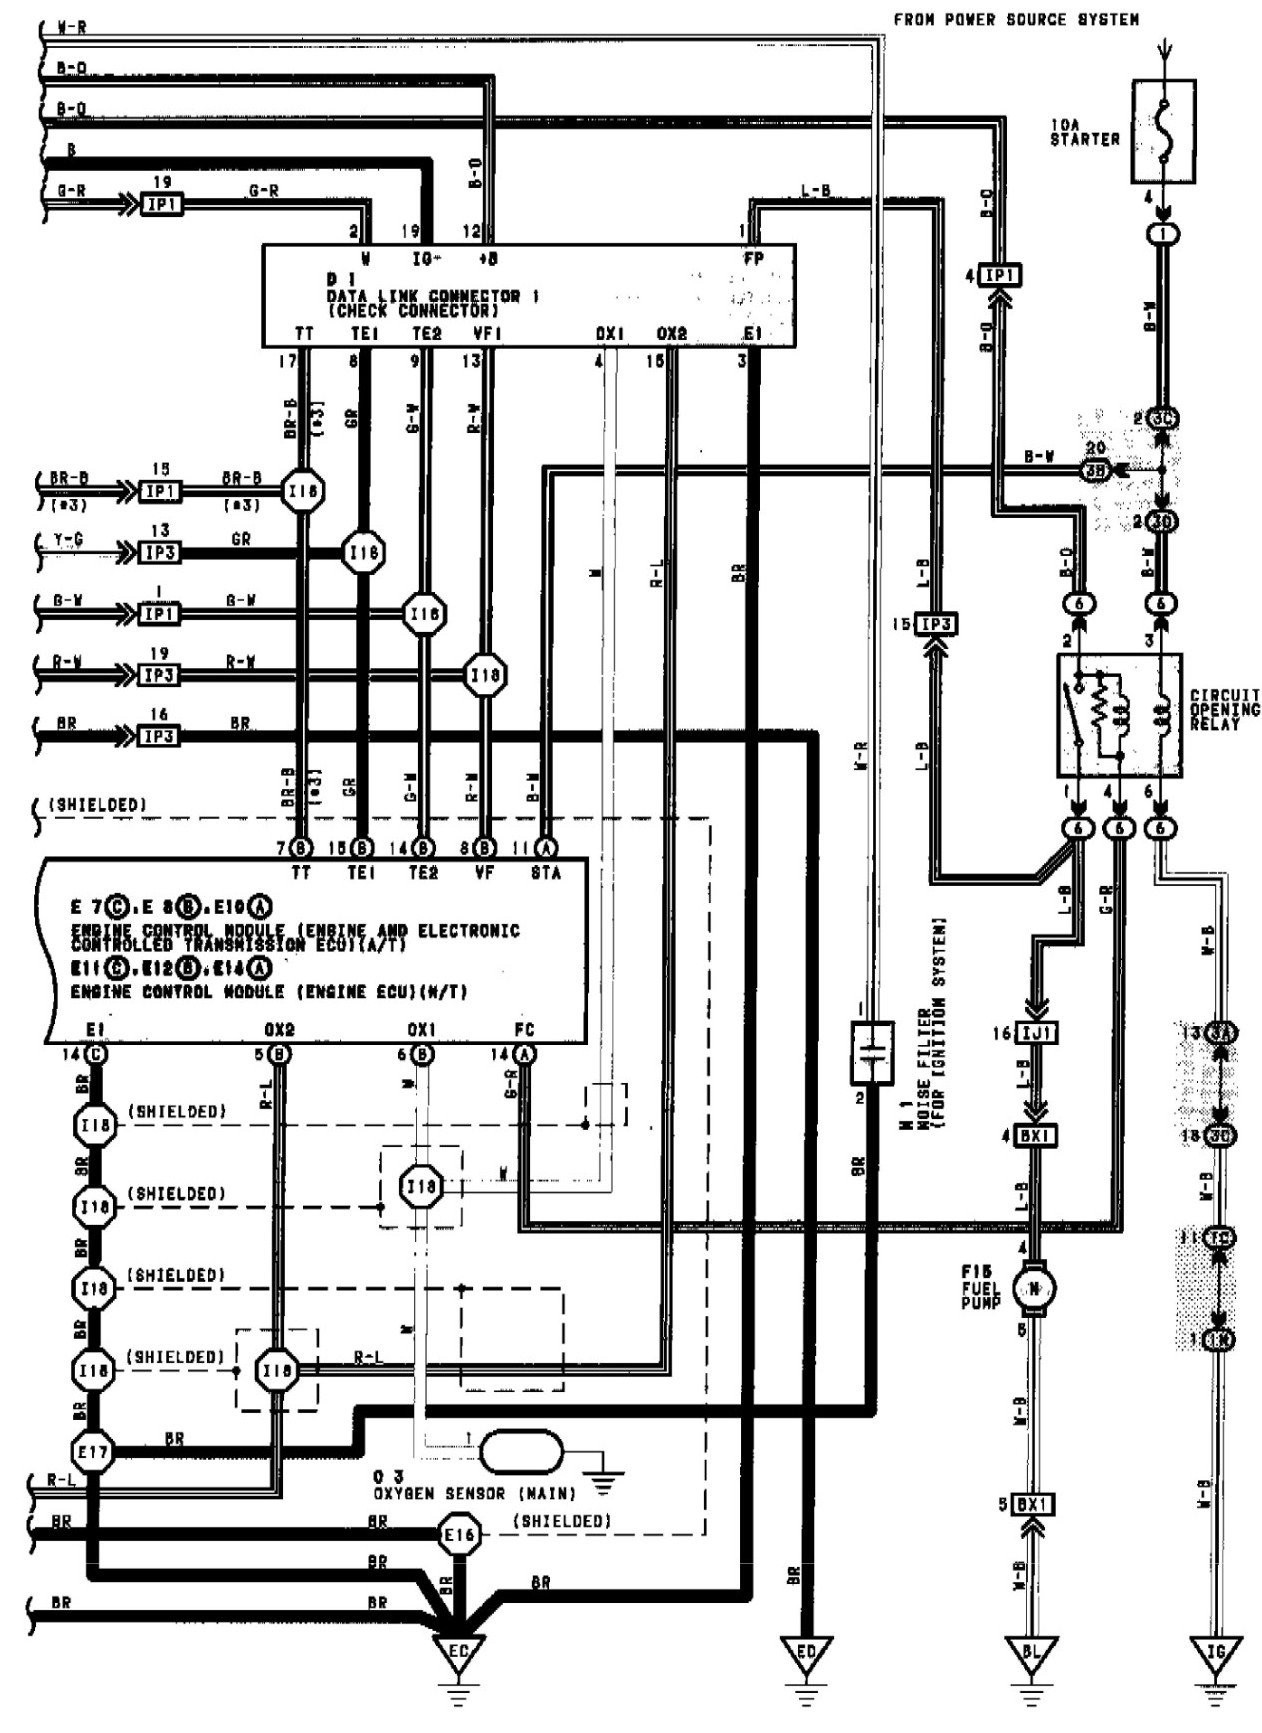 Toyota Camry 2001 Engine Diagram 1990 toyota Camry Stereo Wiring Diagram Shahsramblings Of Toyota Camry 2001 Engine Diagram